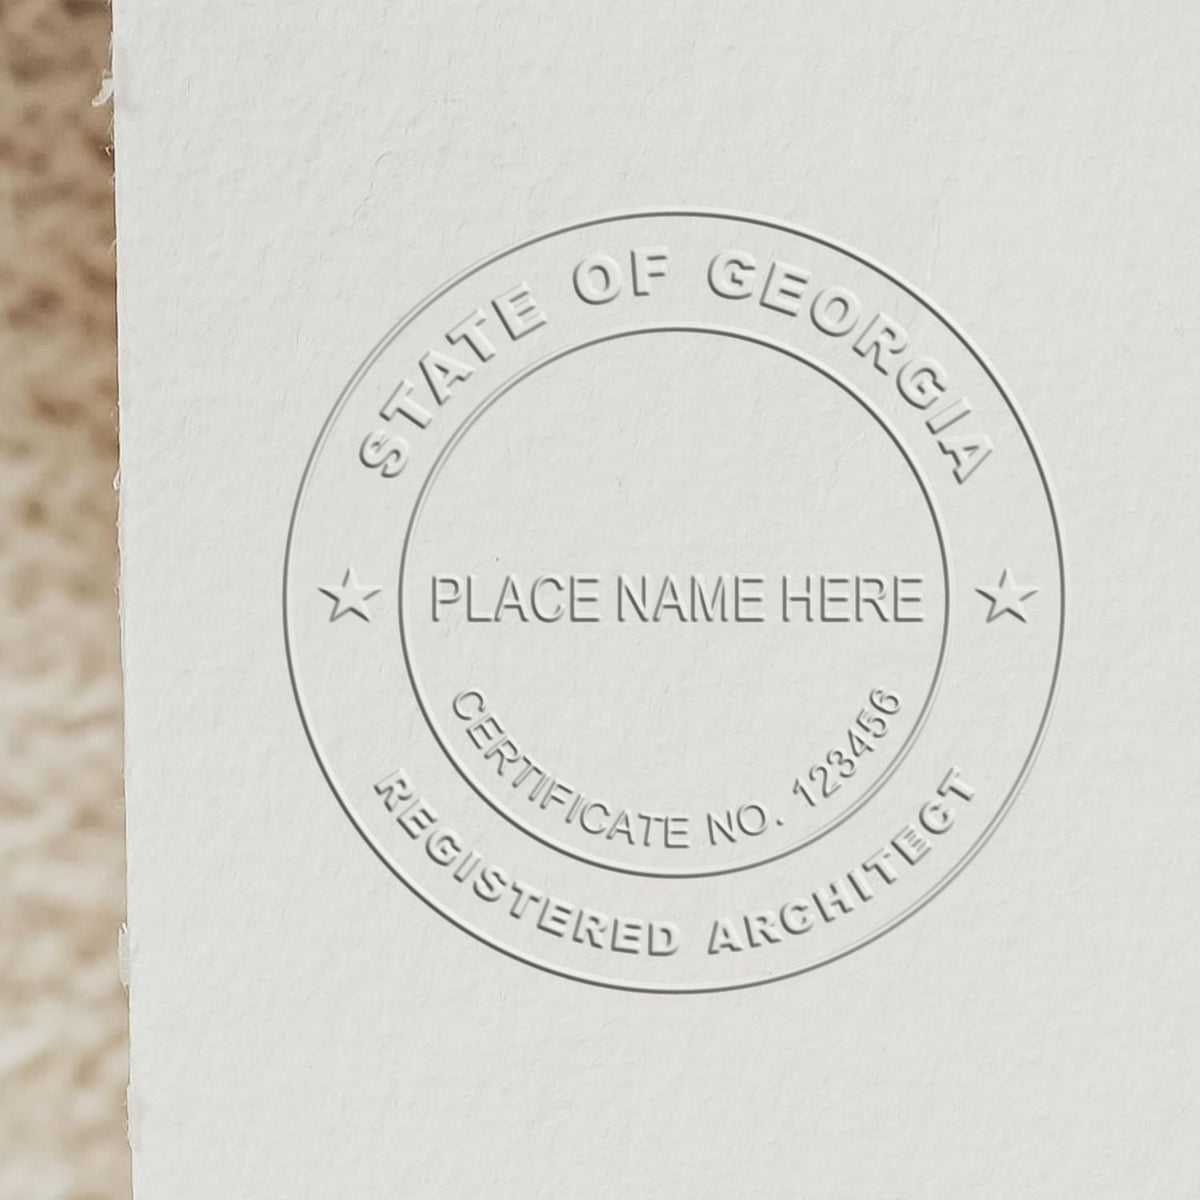 A lifestyle photo showing a stamped image of the Georgia Desk Architect Embossing Seal on a piece of paper